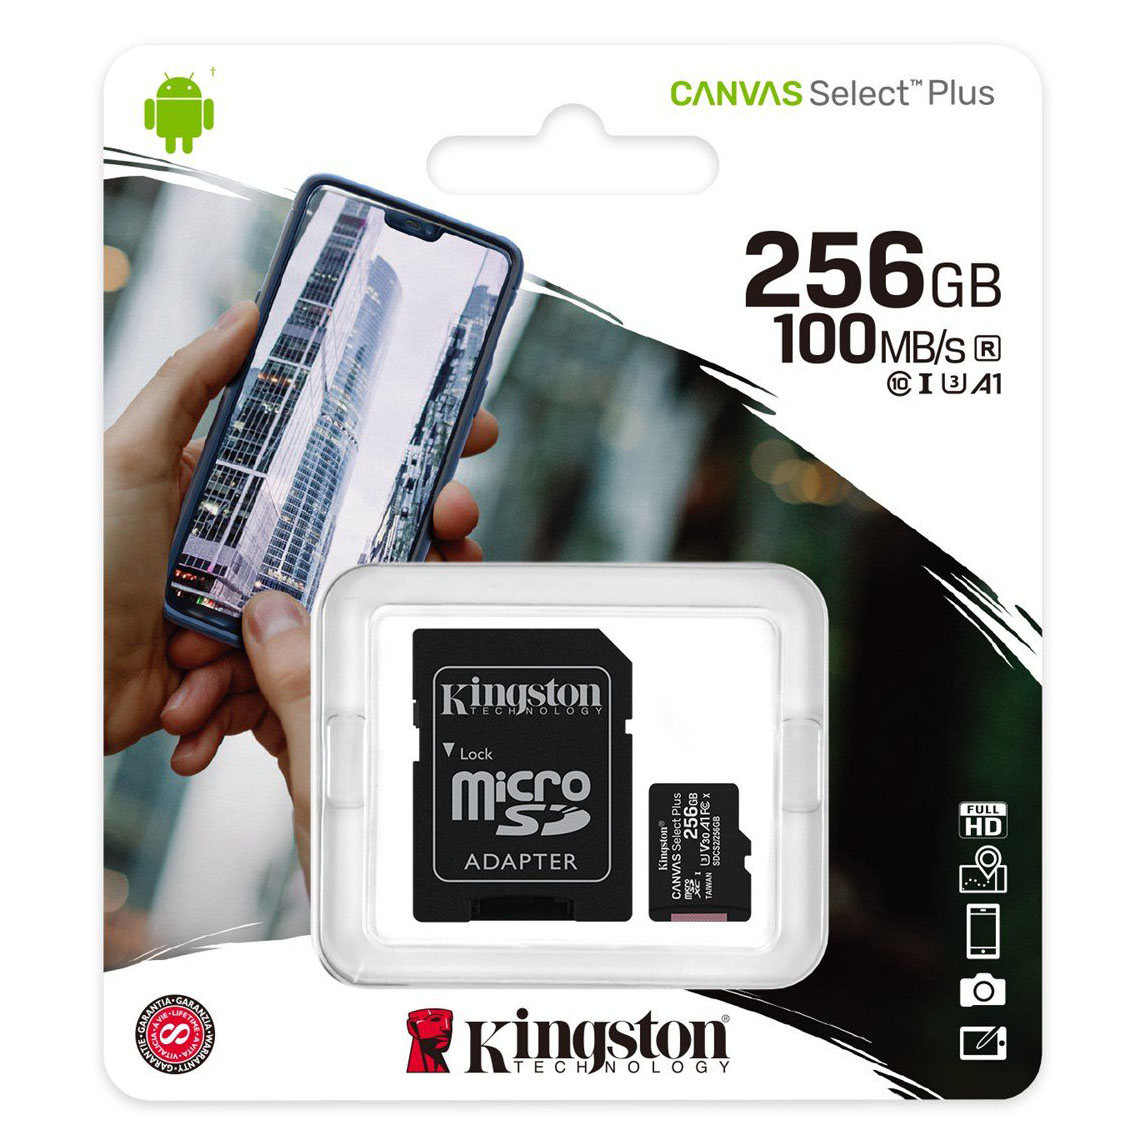 memory-card-microsdxc-kingston-canvas-select-plus-android-a1-2C-with-adapter-2C-256gb-2C-class-10---uhs-1-u1-2C-sdcs2-256gb--28eu-blister-29